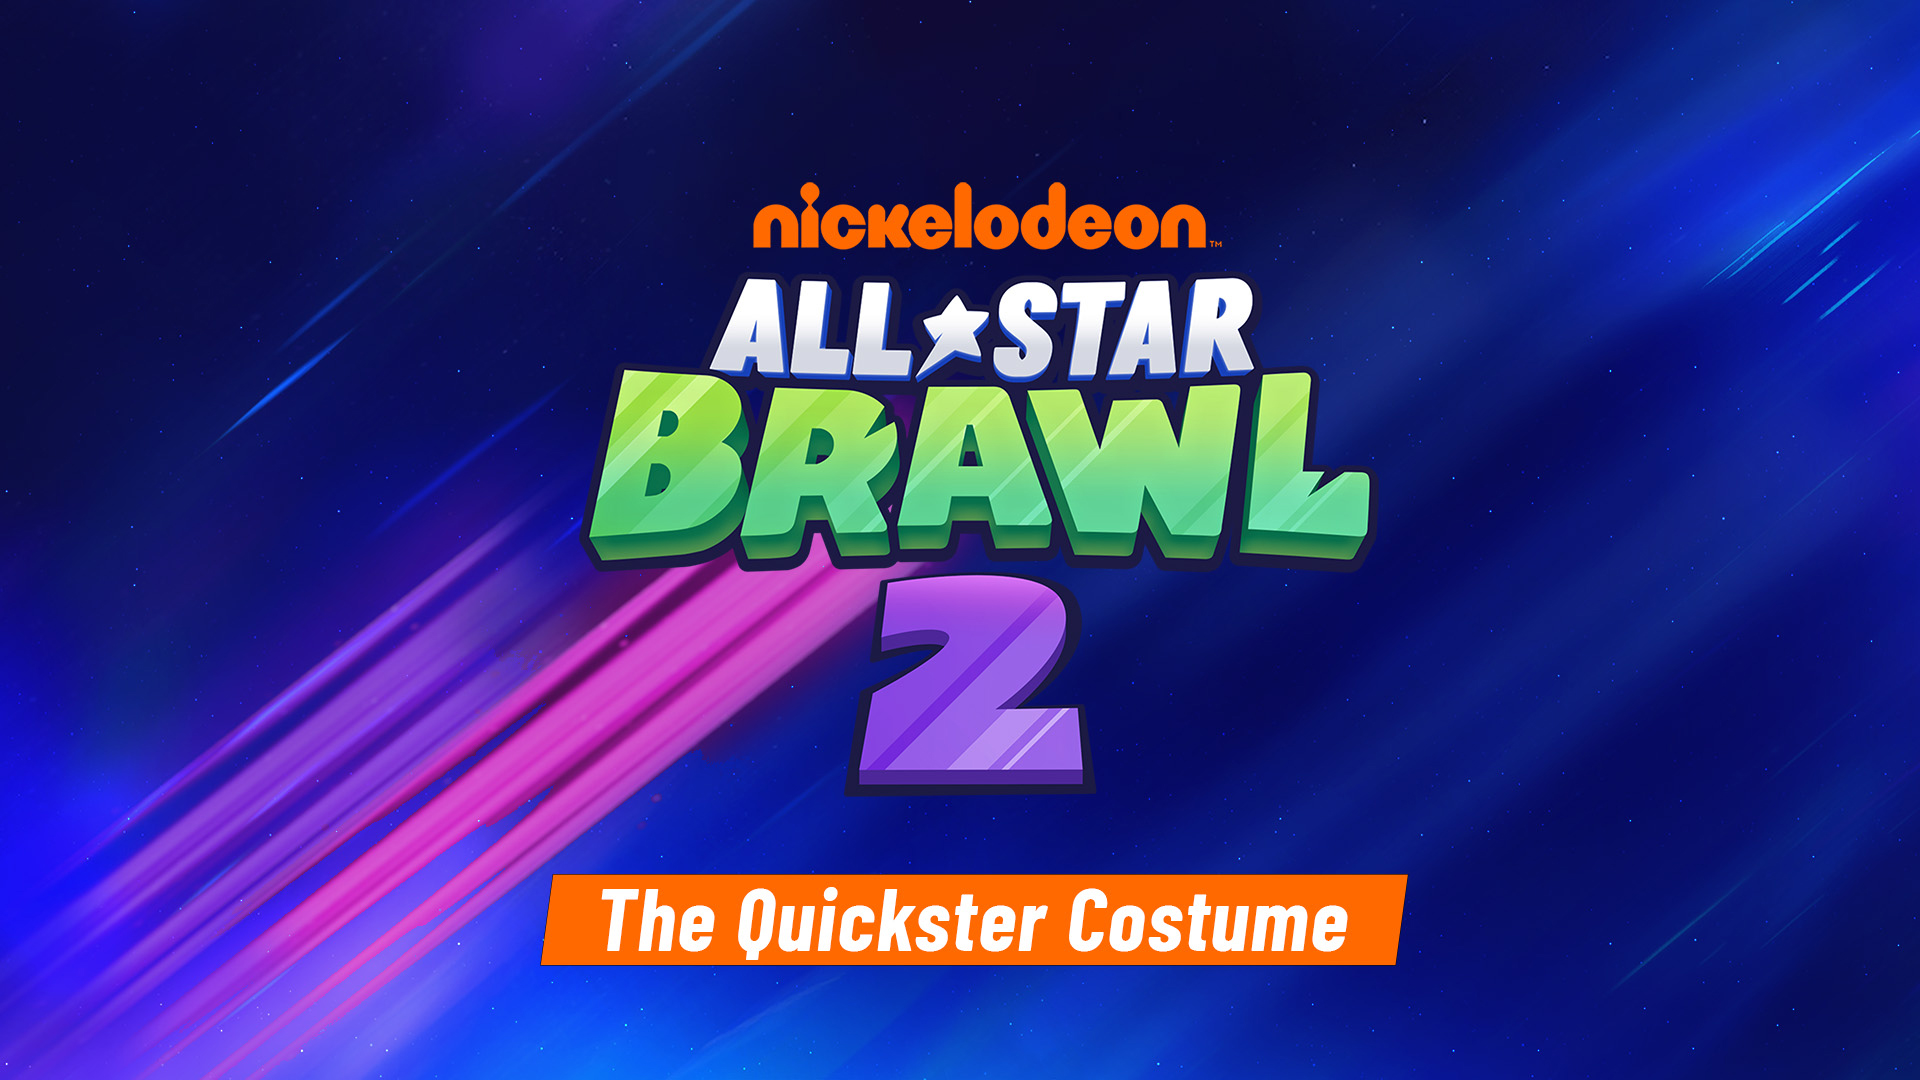 Nickelodeon All-Star Brawl 2 The Quickster Costume